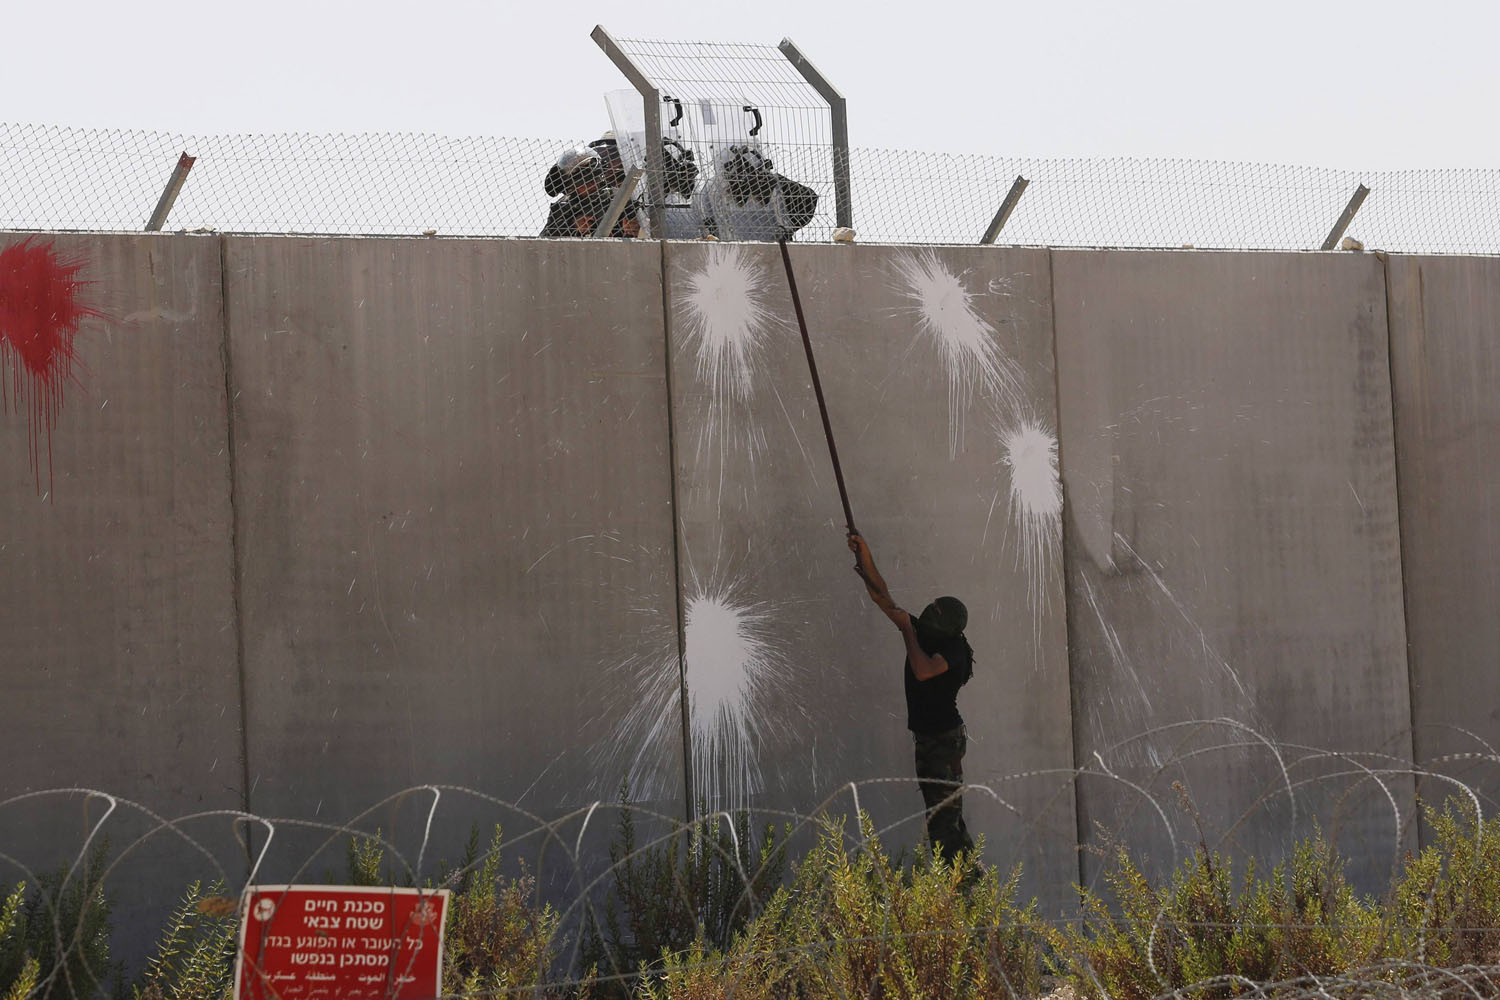 A Palestinian protester uses a metal rod at the controversial Israeli barrier during clashes with Israeli border policemen after a protest in Bilin